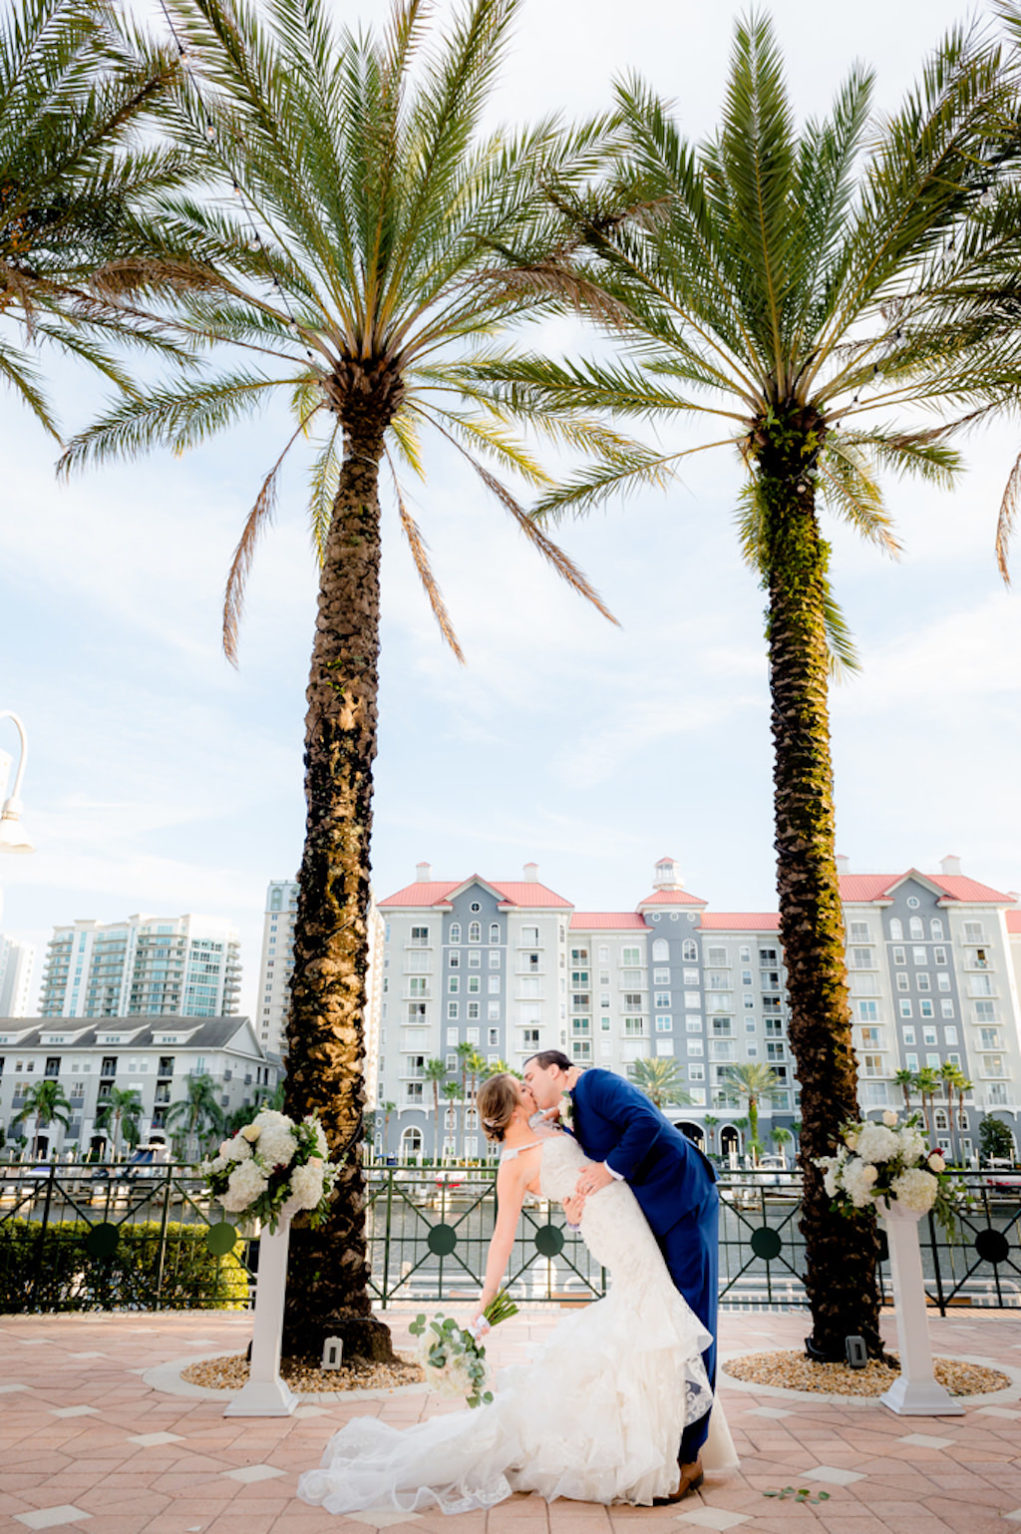 Florida Bride and Groom Wedding Portrait | Tampa Bay Wedding Venue Tampa Marriott Water Street | Planner Special Moments Event Planning